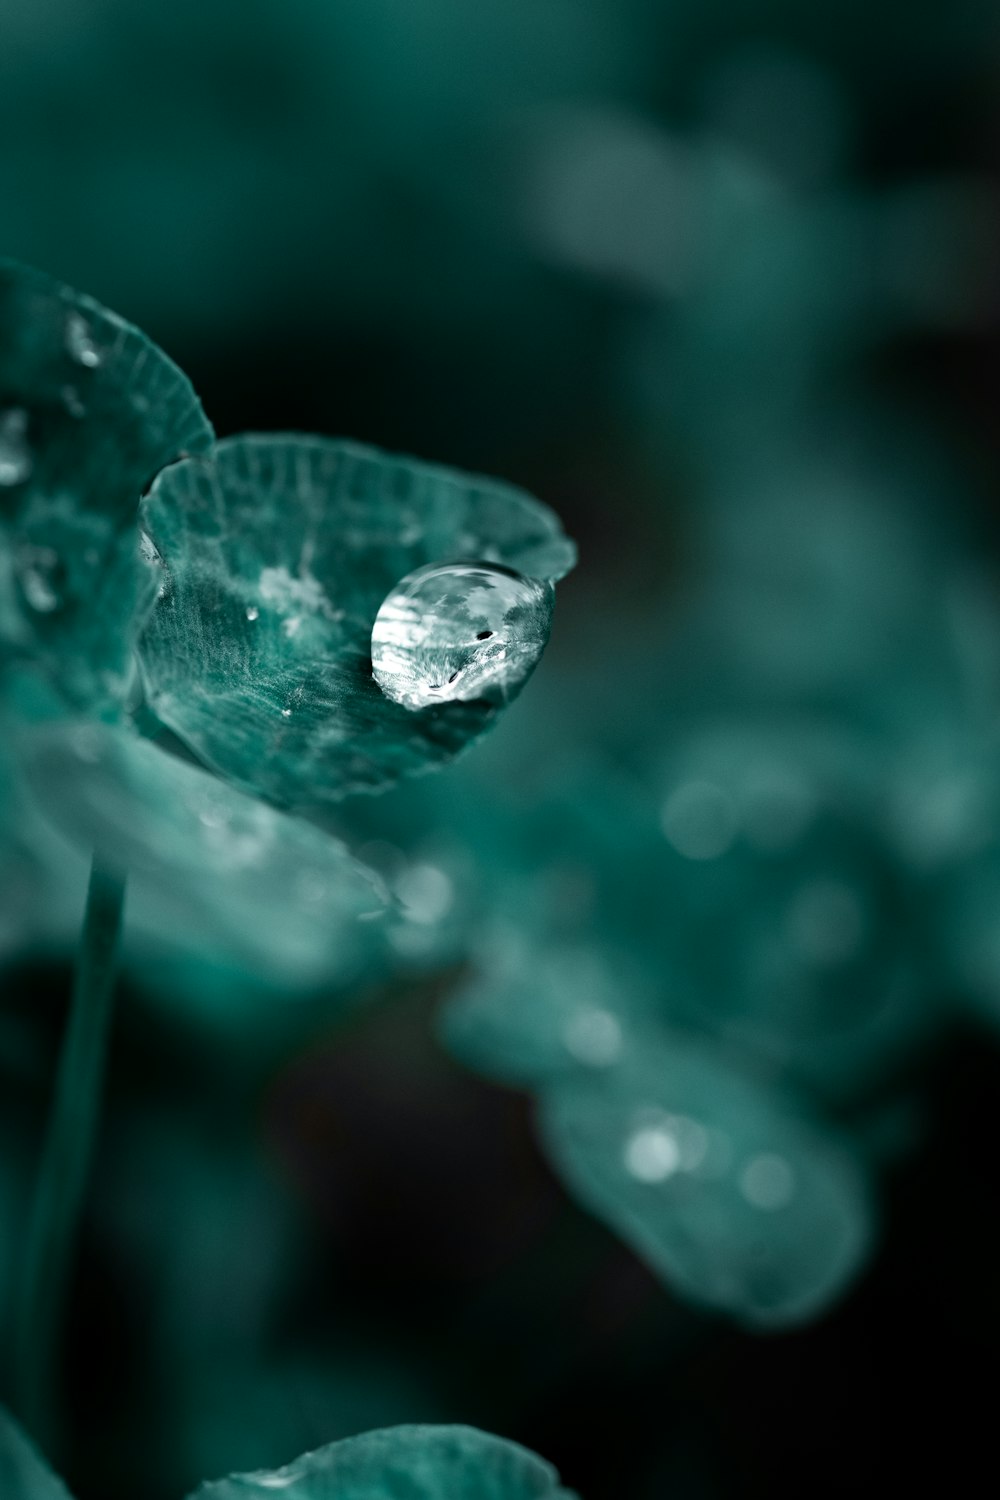 a close up of a water drop on a leaf